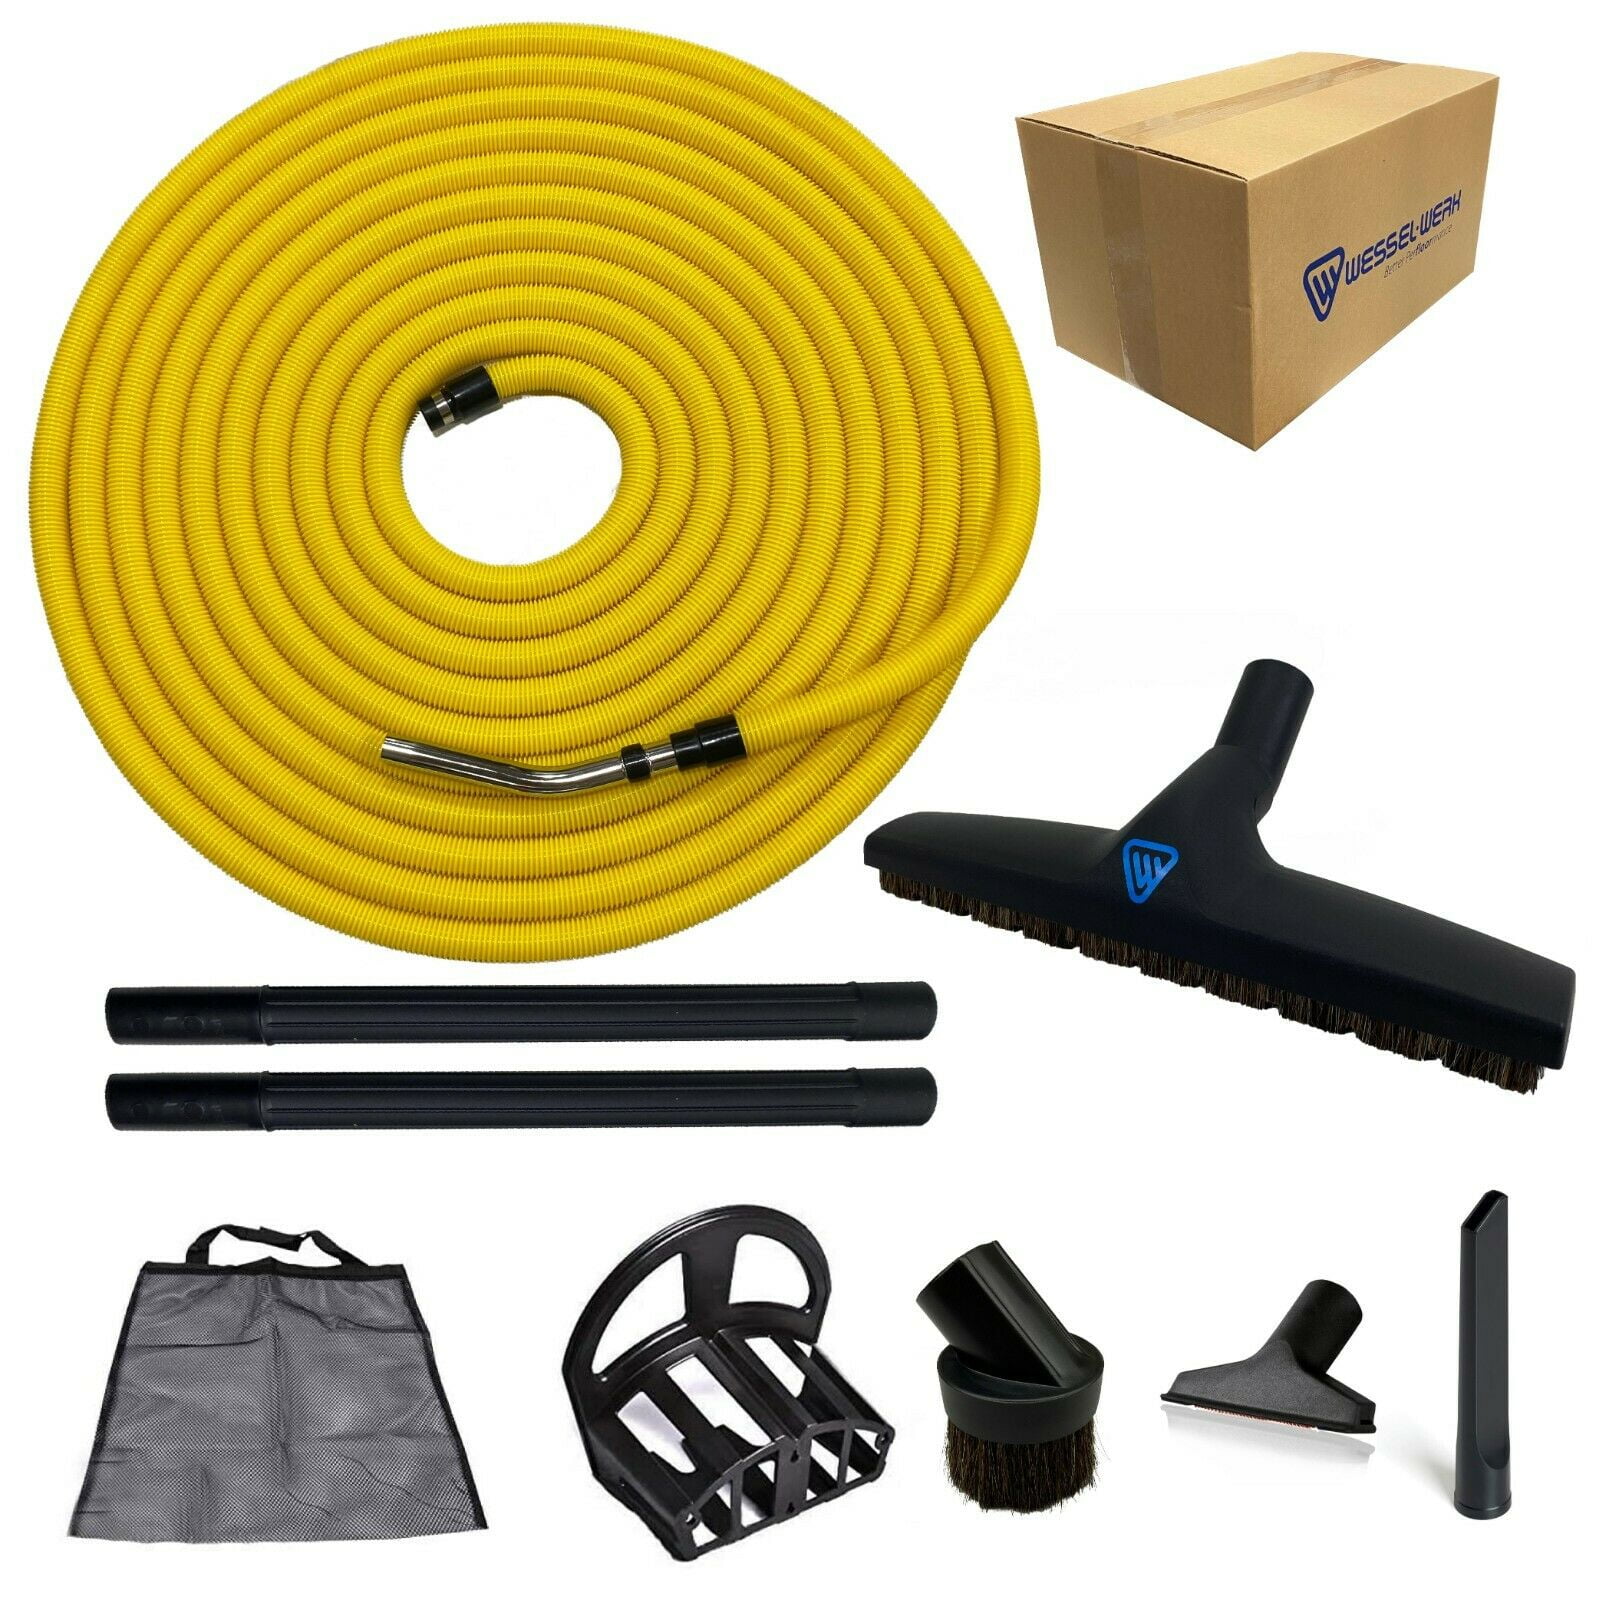 nEW Deluxe Central Vacuum 35 ft Lightweight Hose Attachment VAC Set-Easy to uSE!